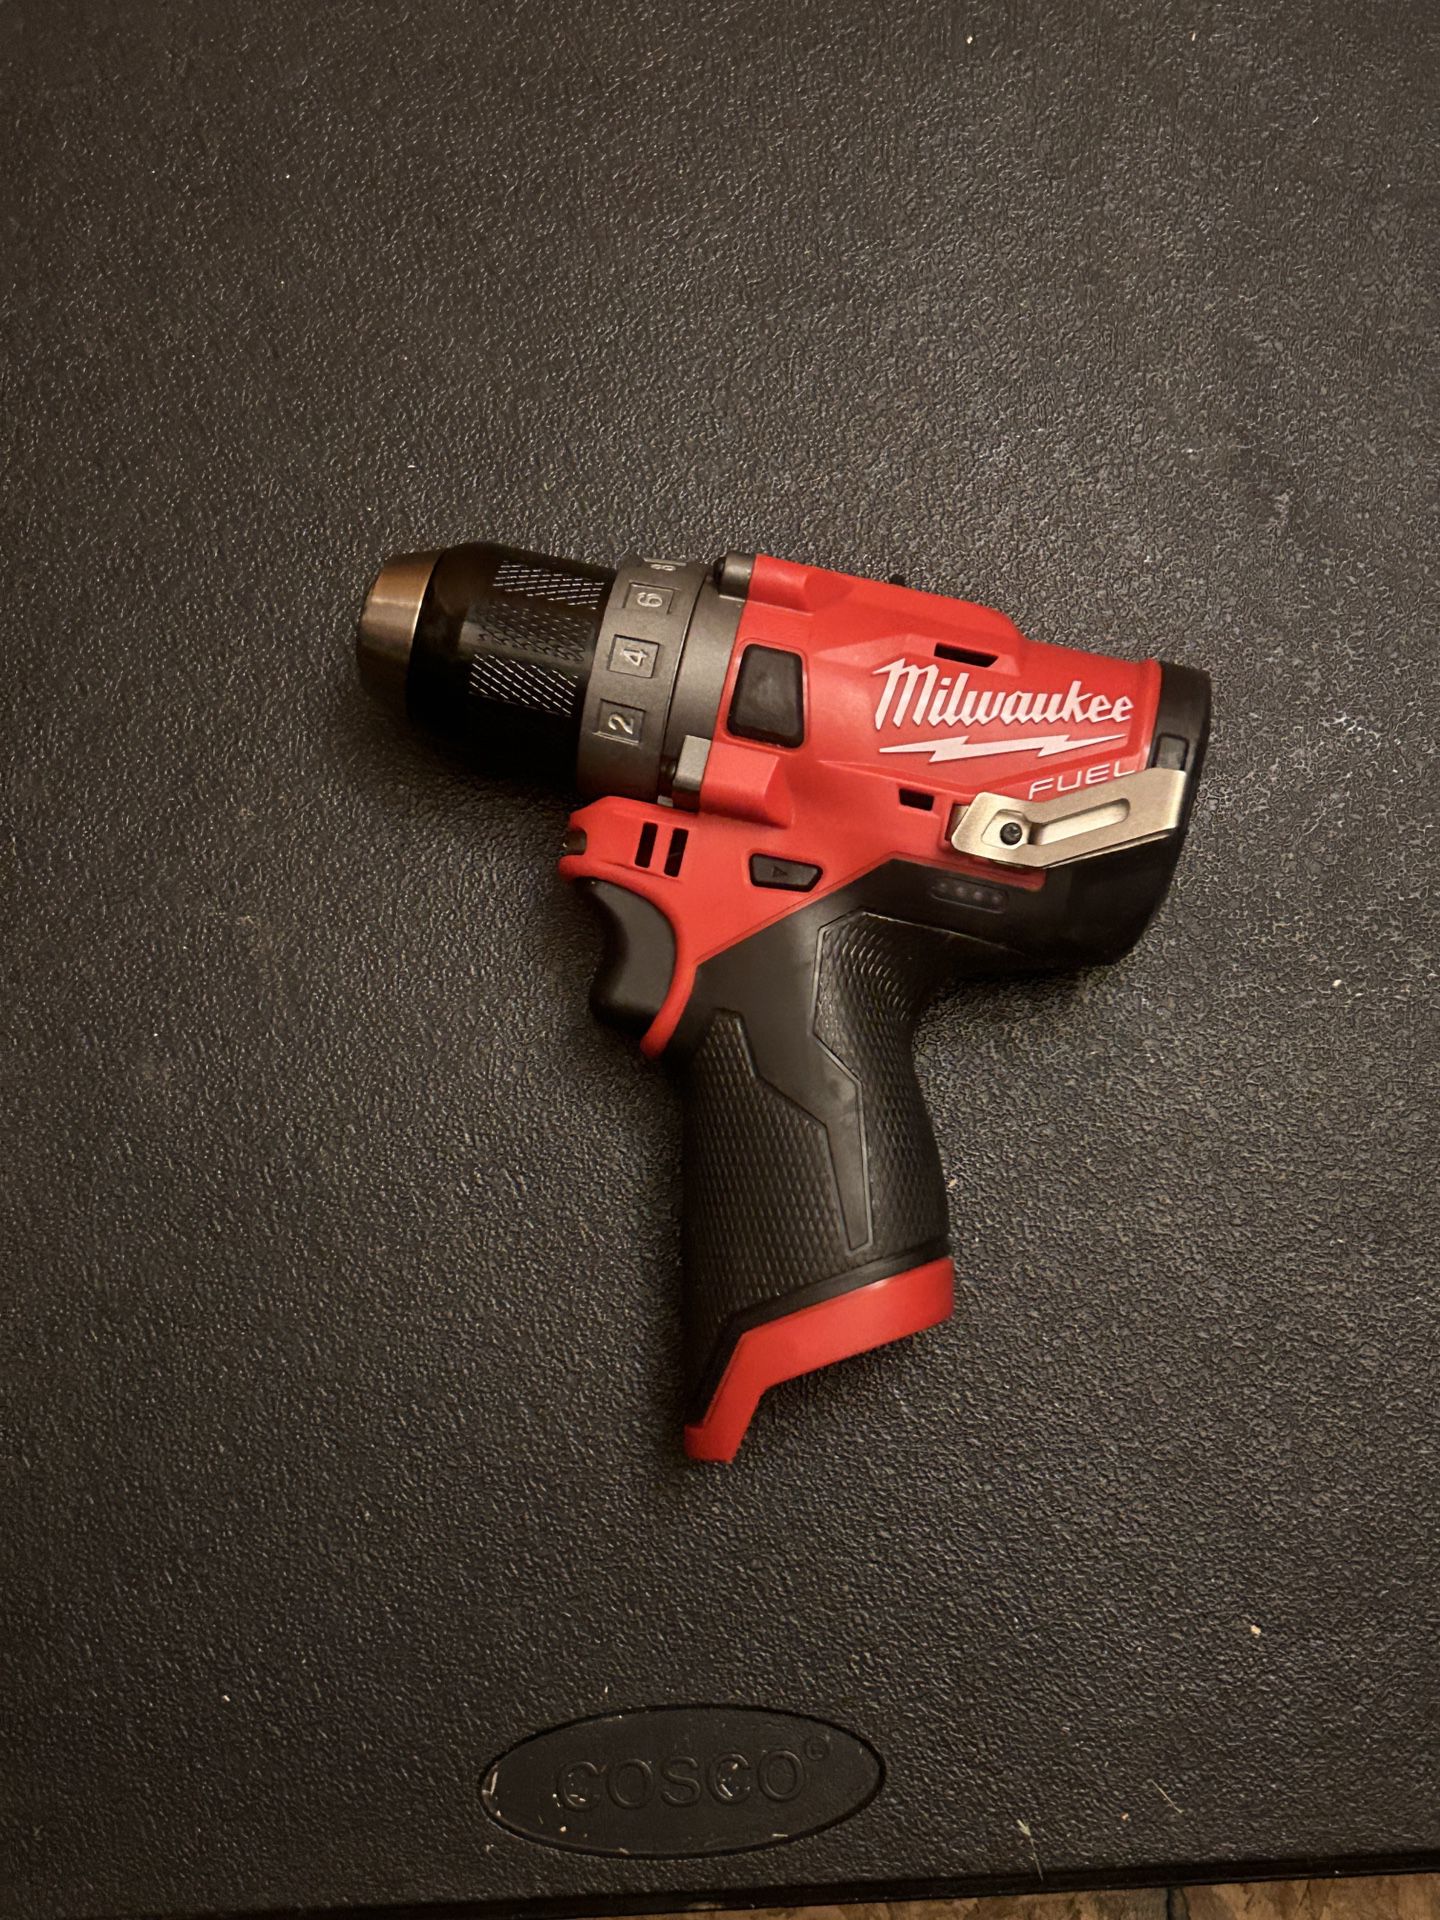 New-M12 FUEL 12V Lithium-lon Brushless Cordless 1/2 in. Drill Driver (Tool-Only)